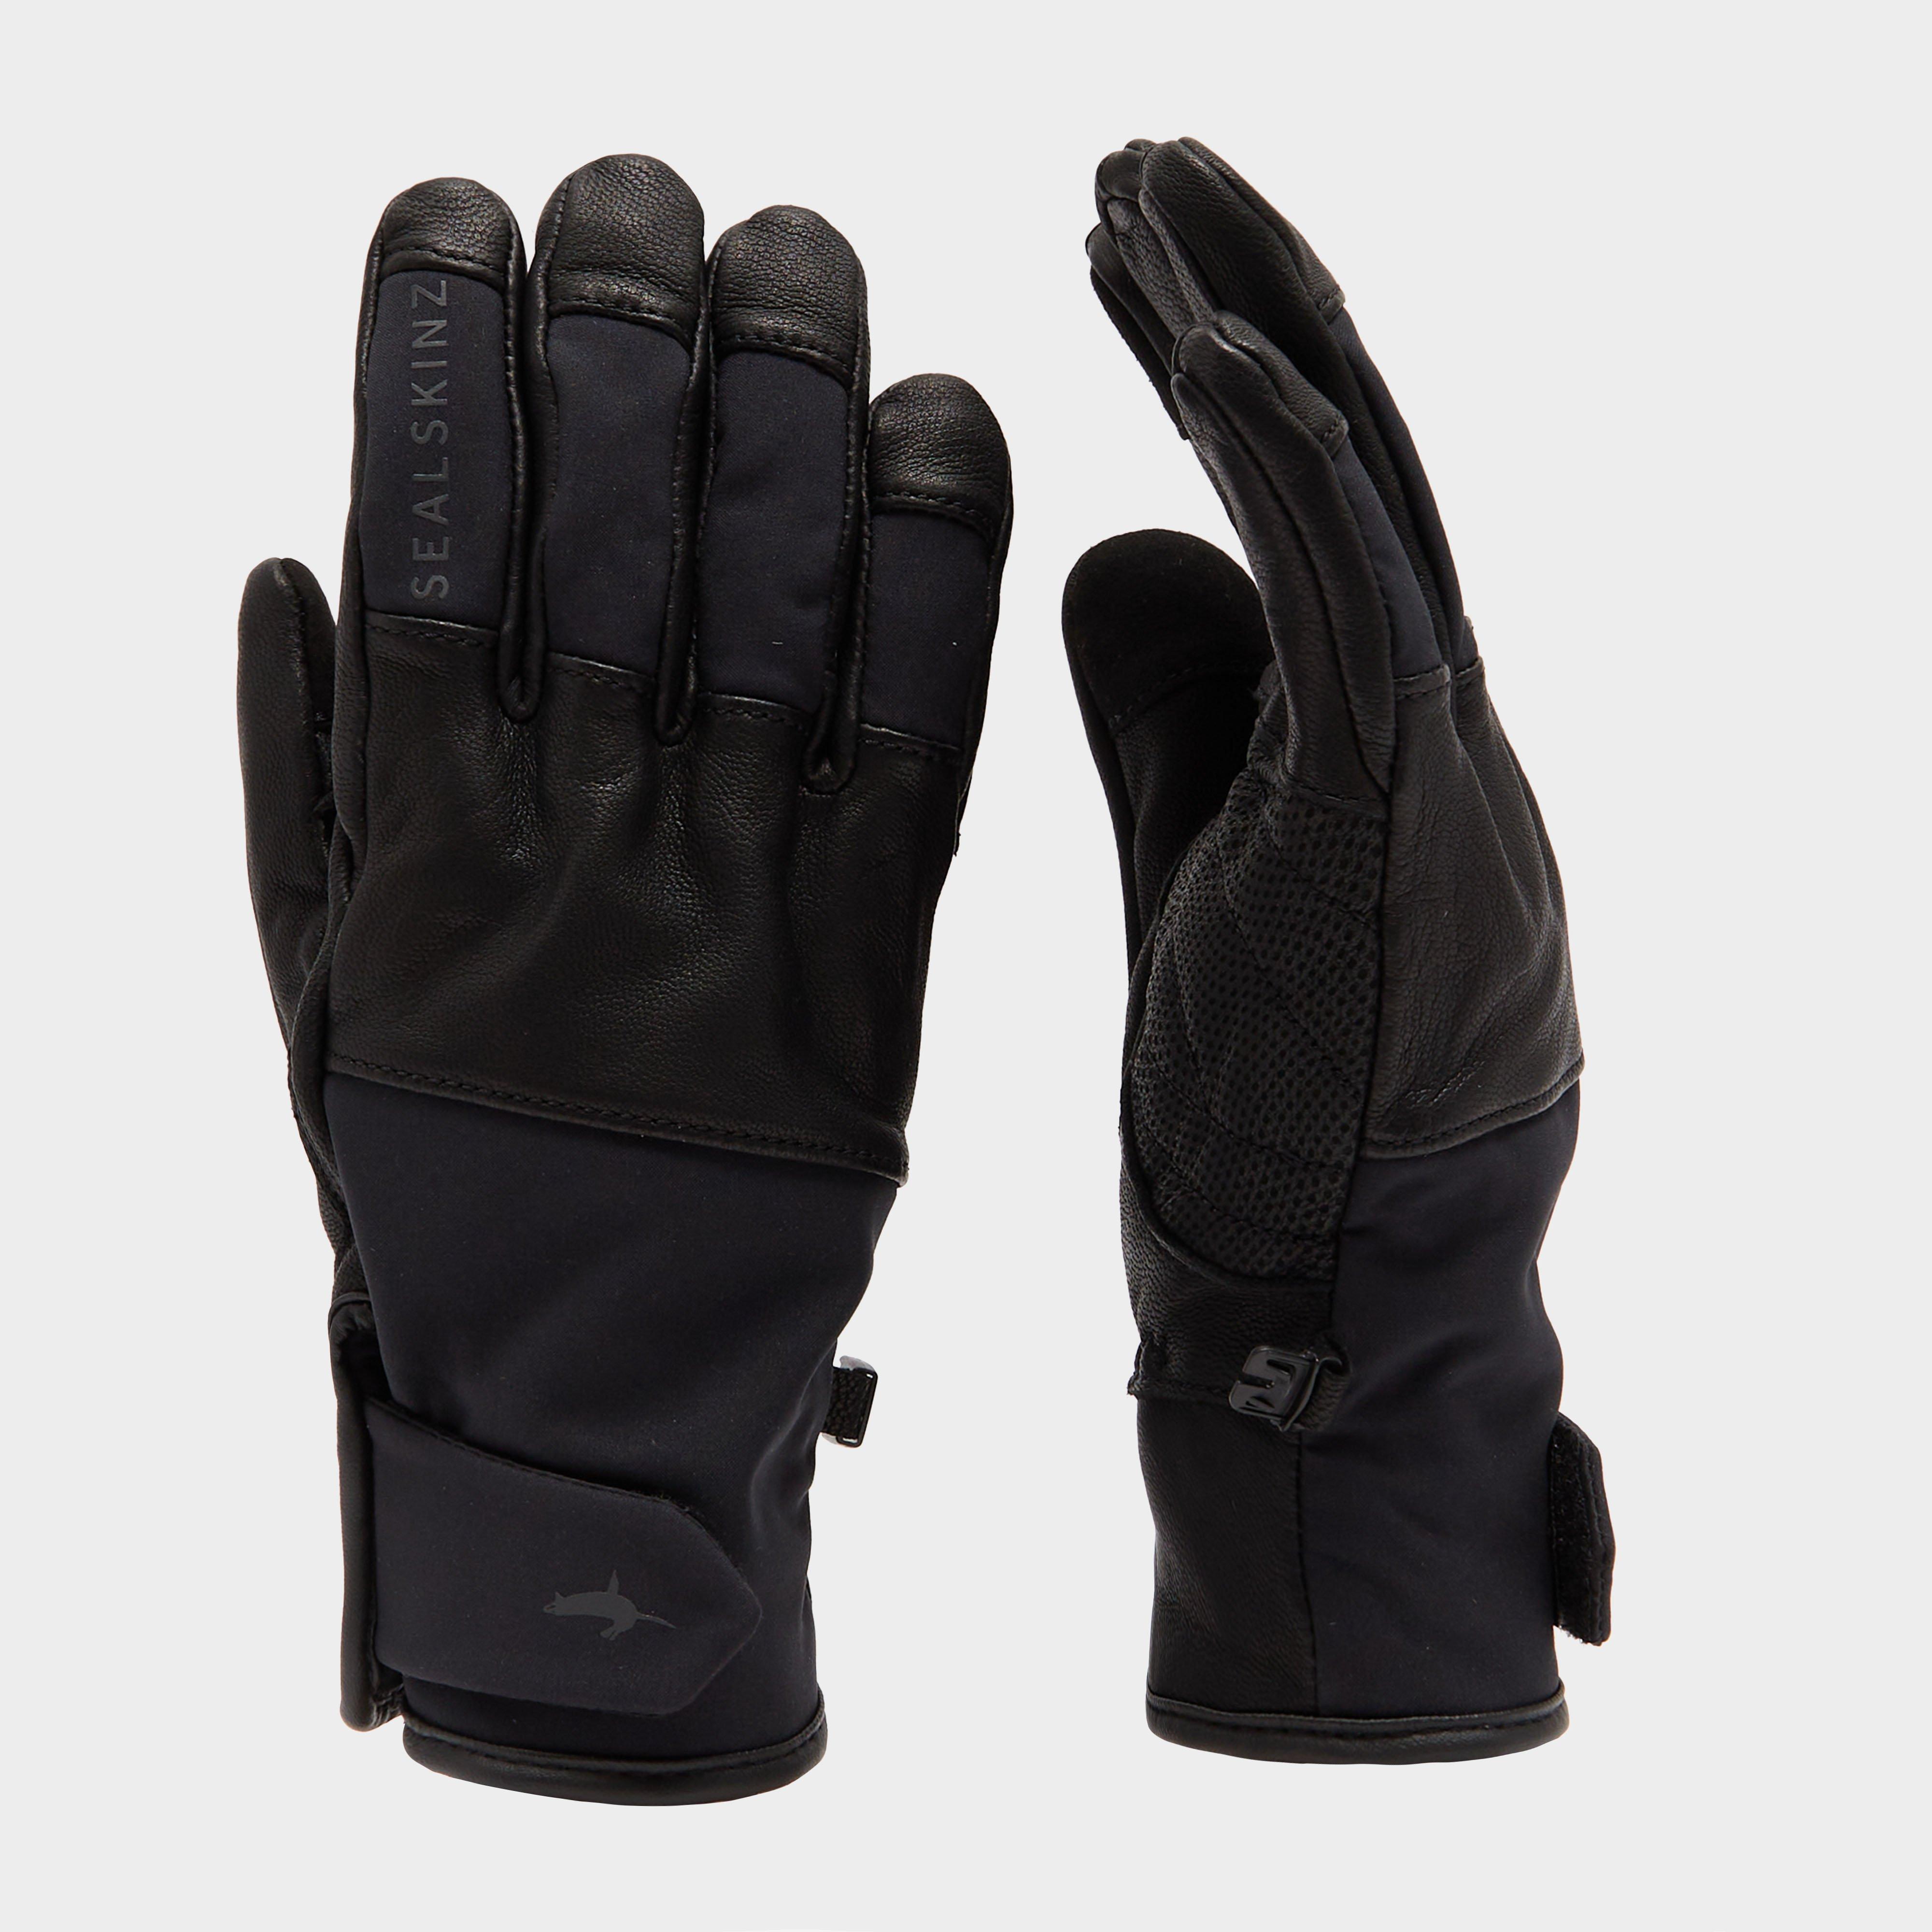 Photos - Cycling Gloves Waterproof Cold Weather Glove with Fusion Control, Black 